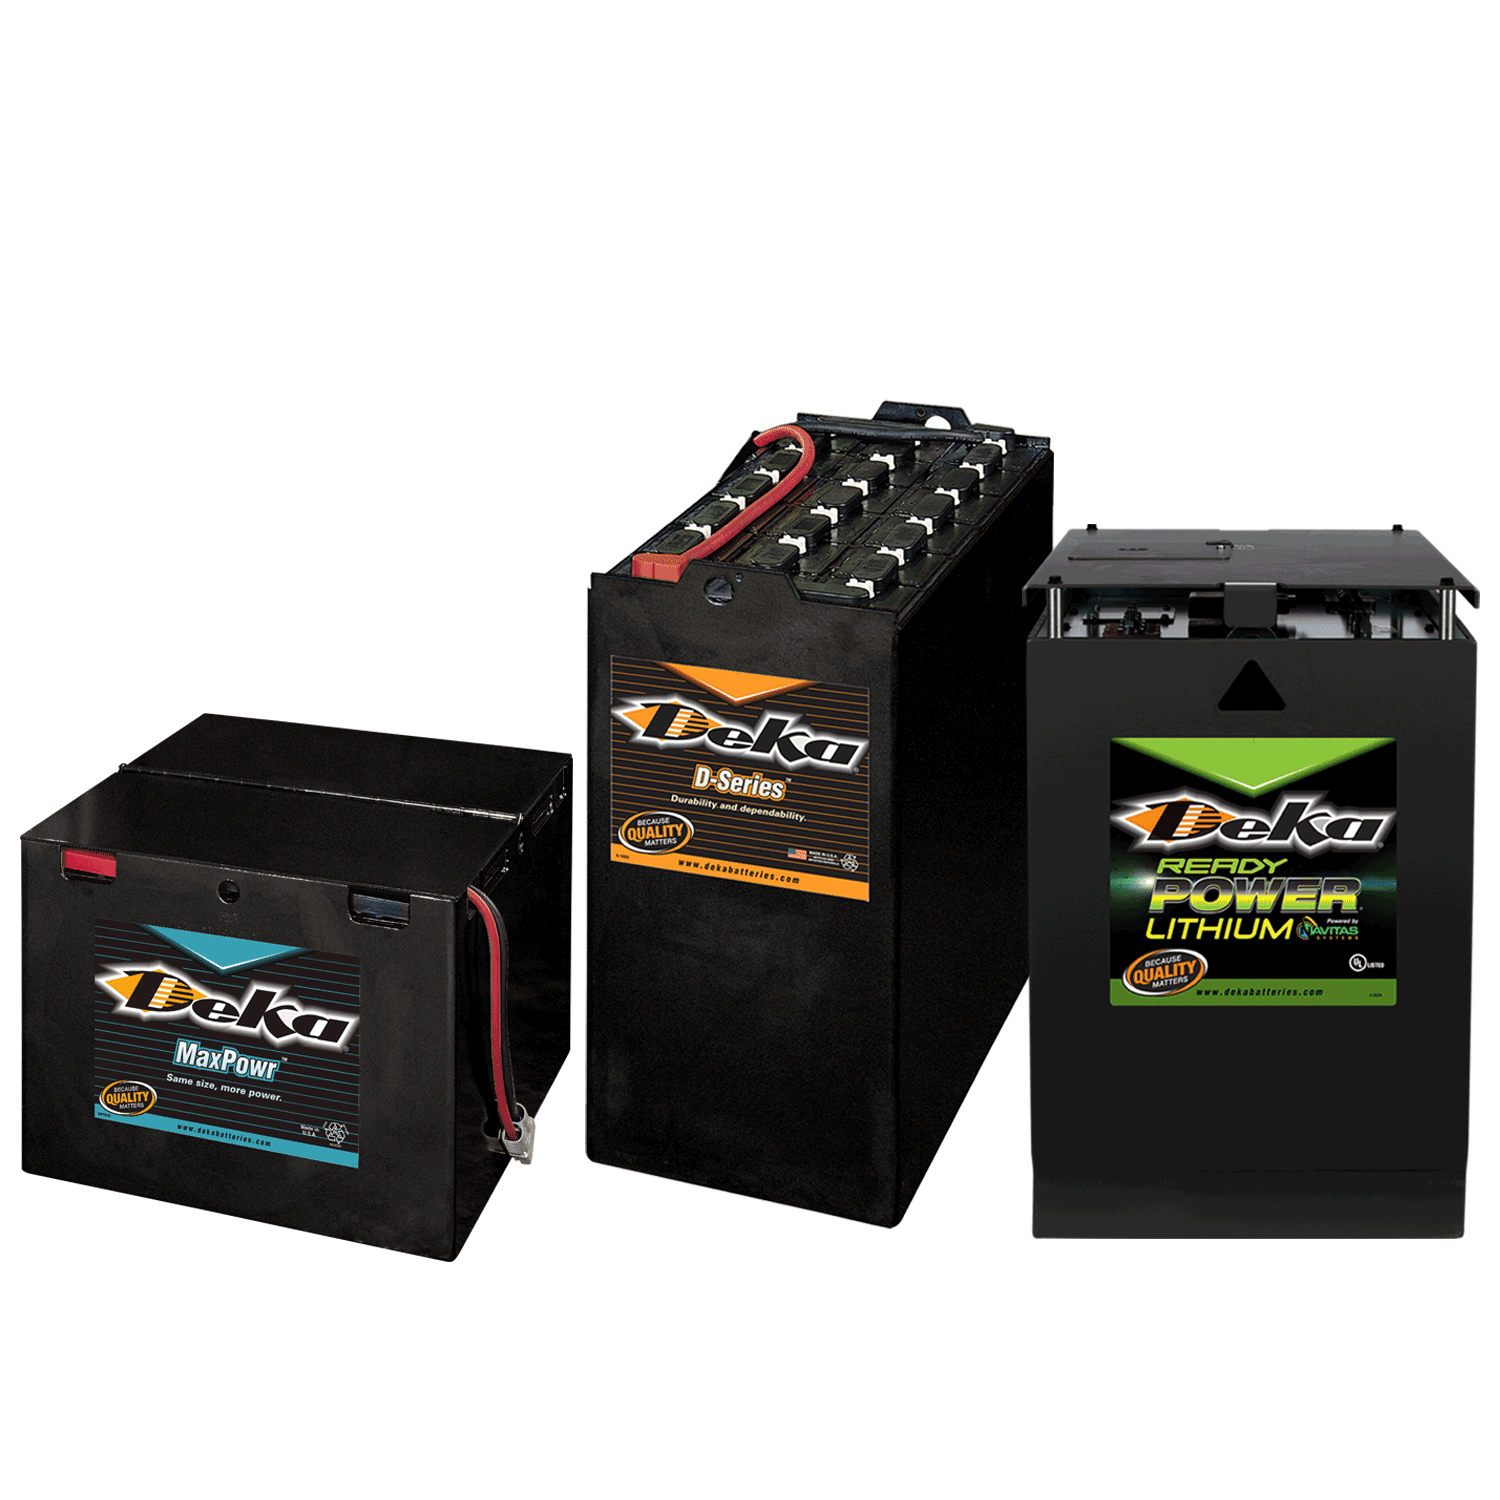 Where can you find out the locations of Deka Battery distributors?